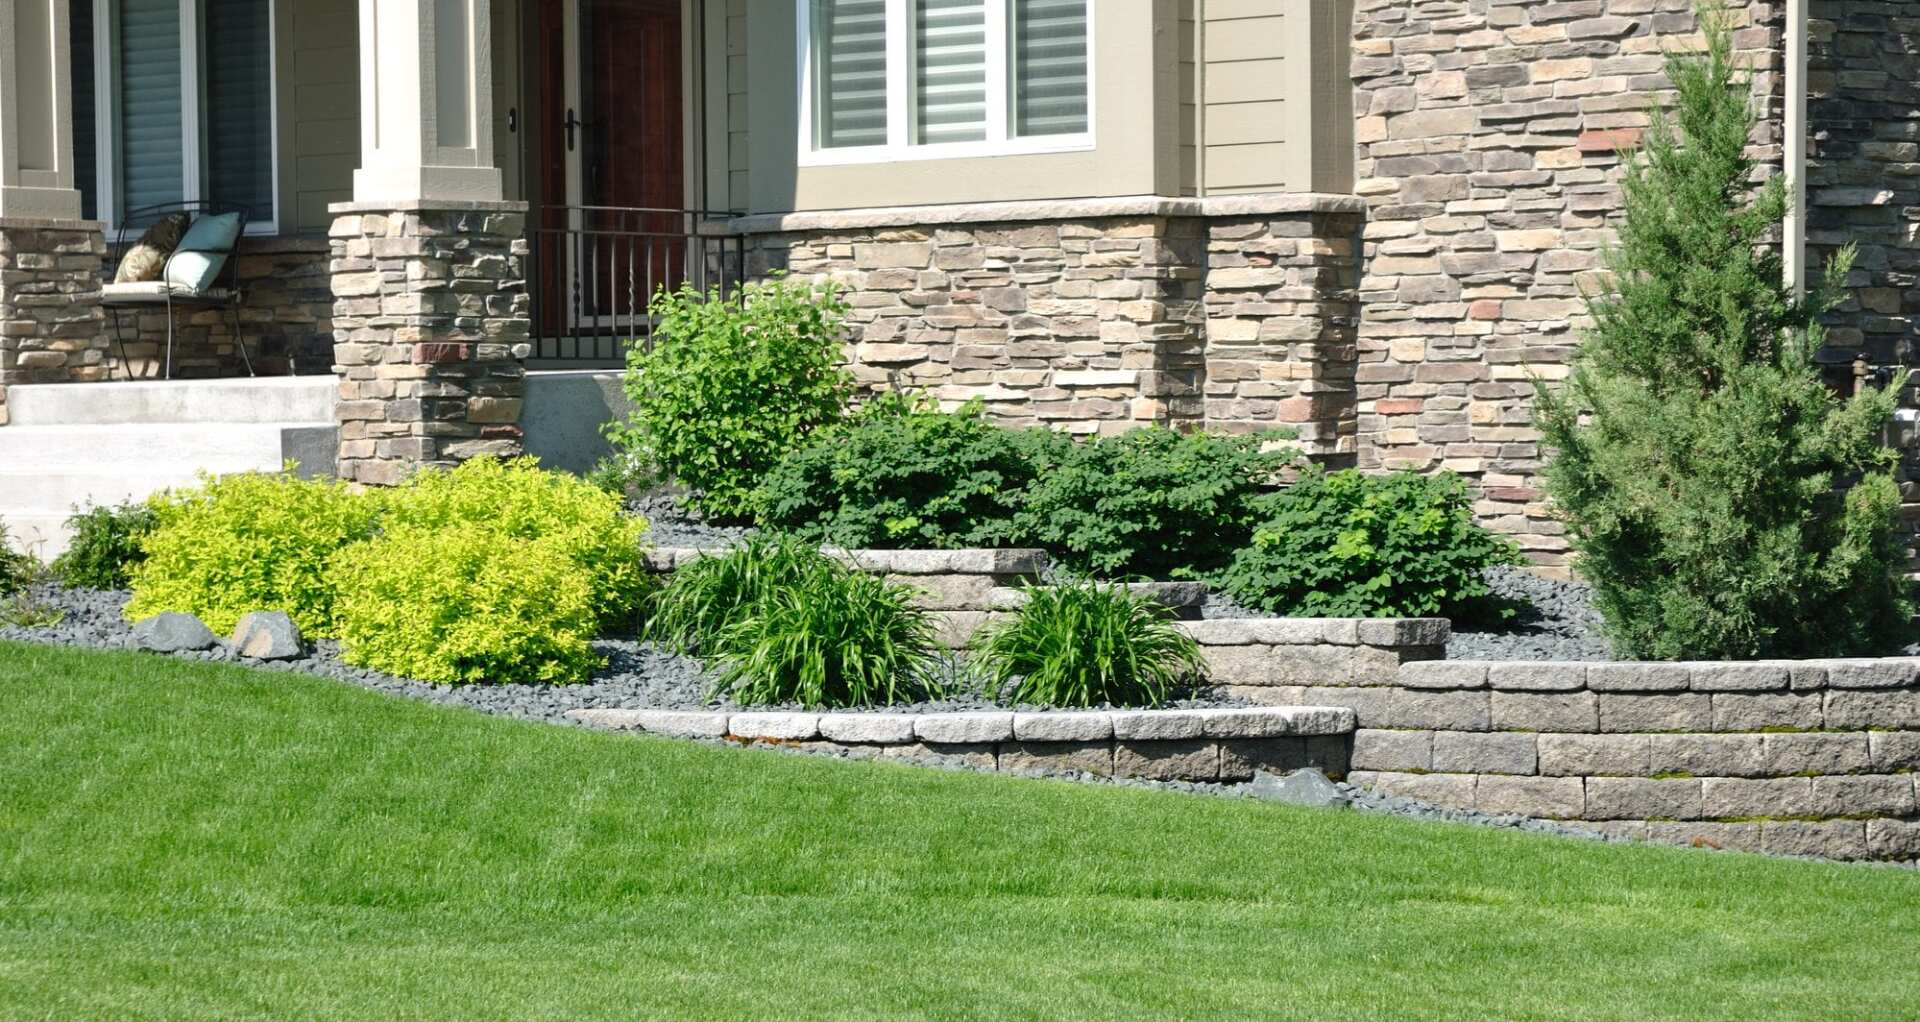 5 Reasons to Use Concrete for Your Retaining Wall